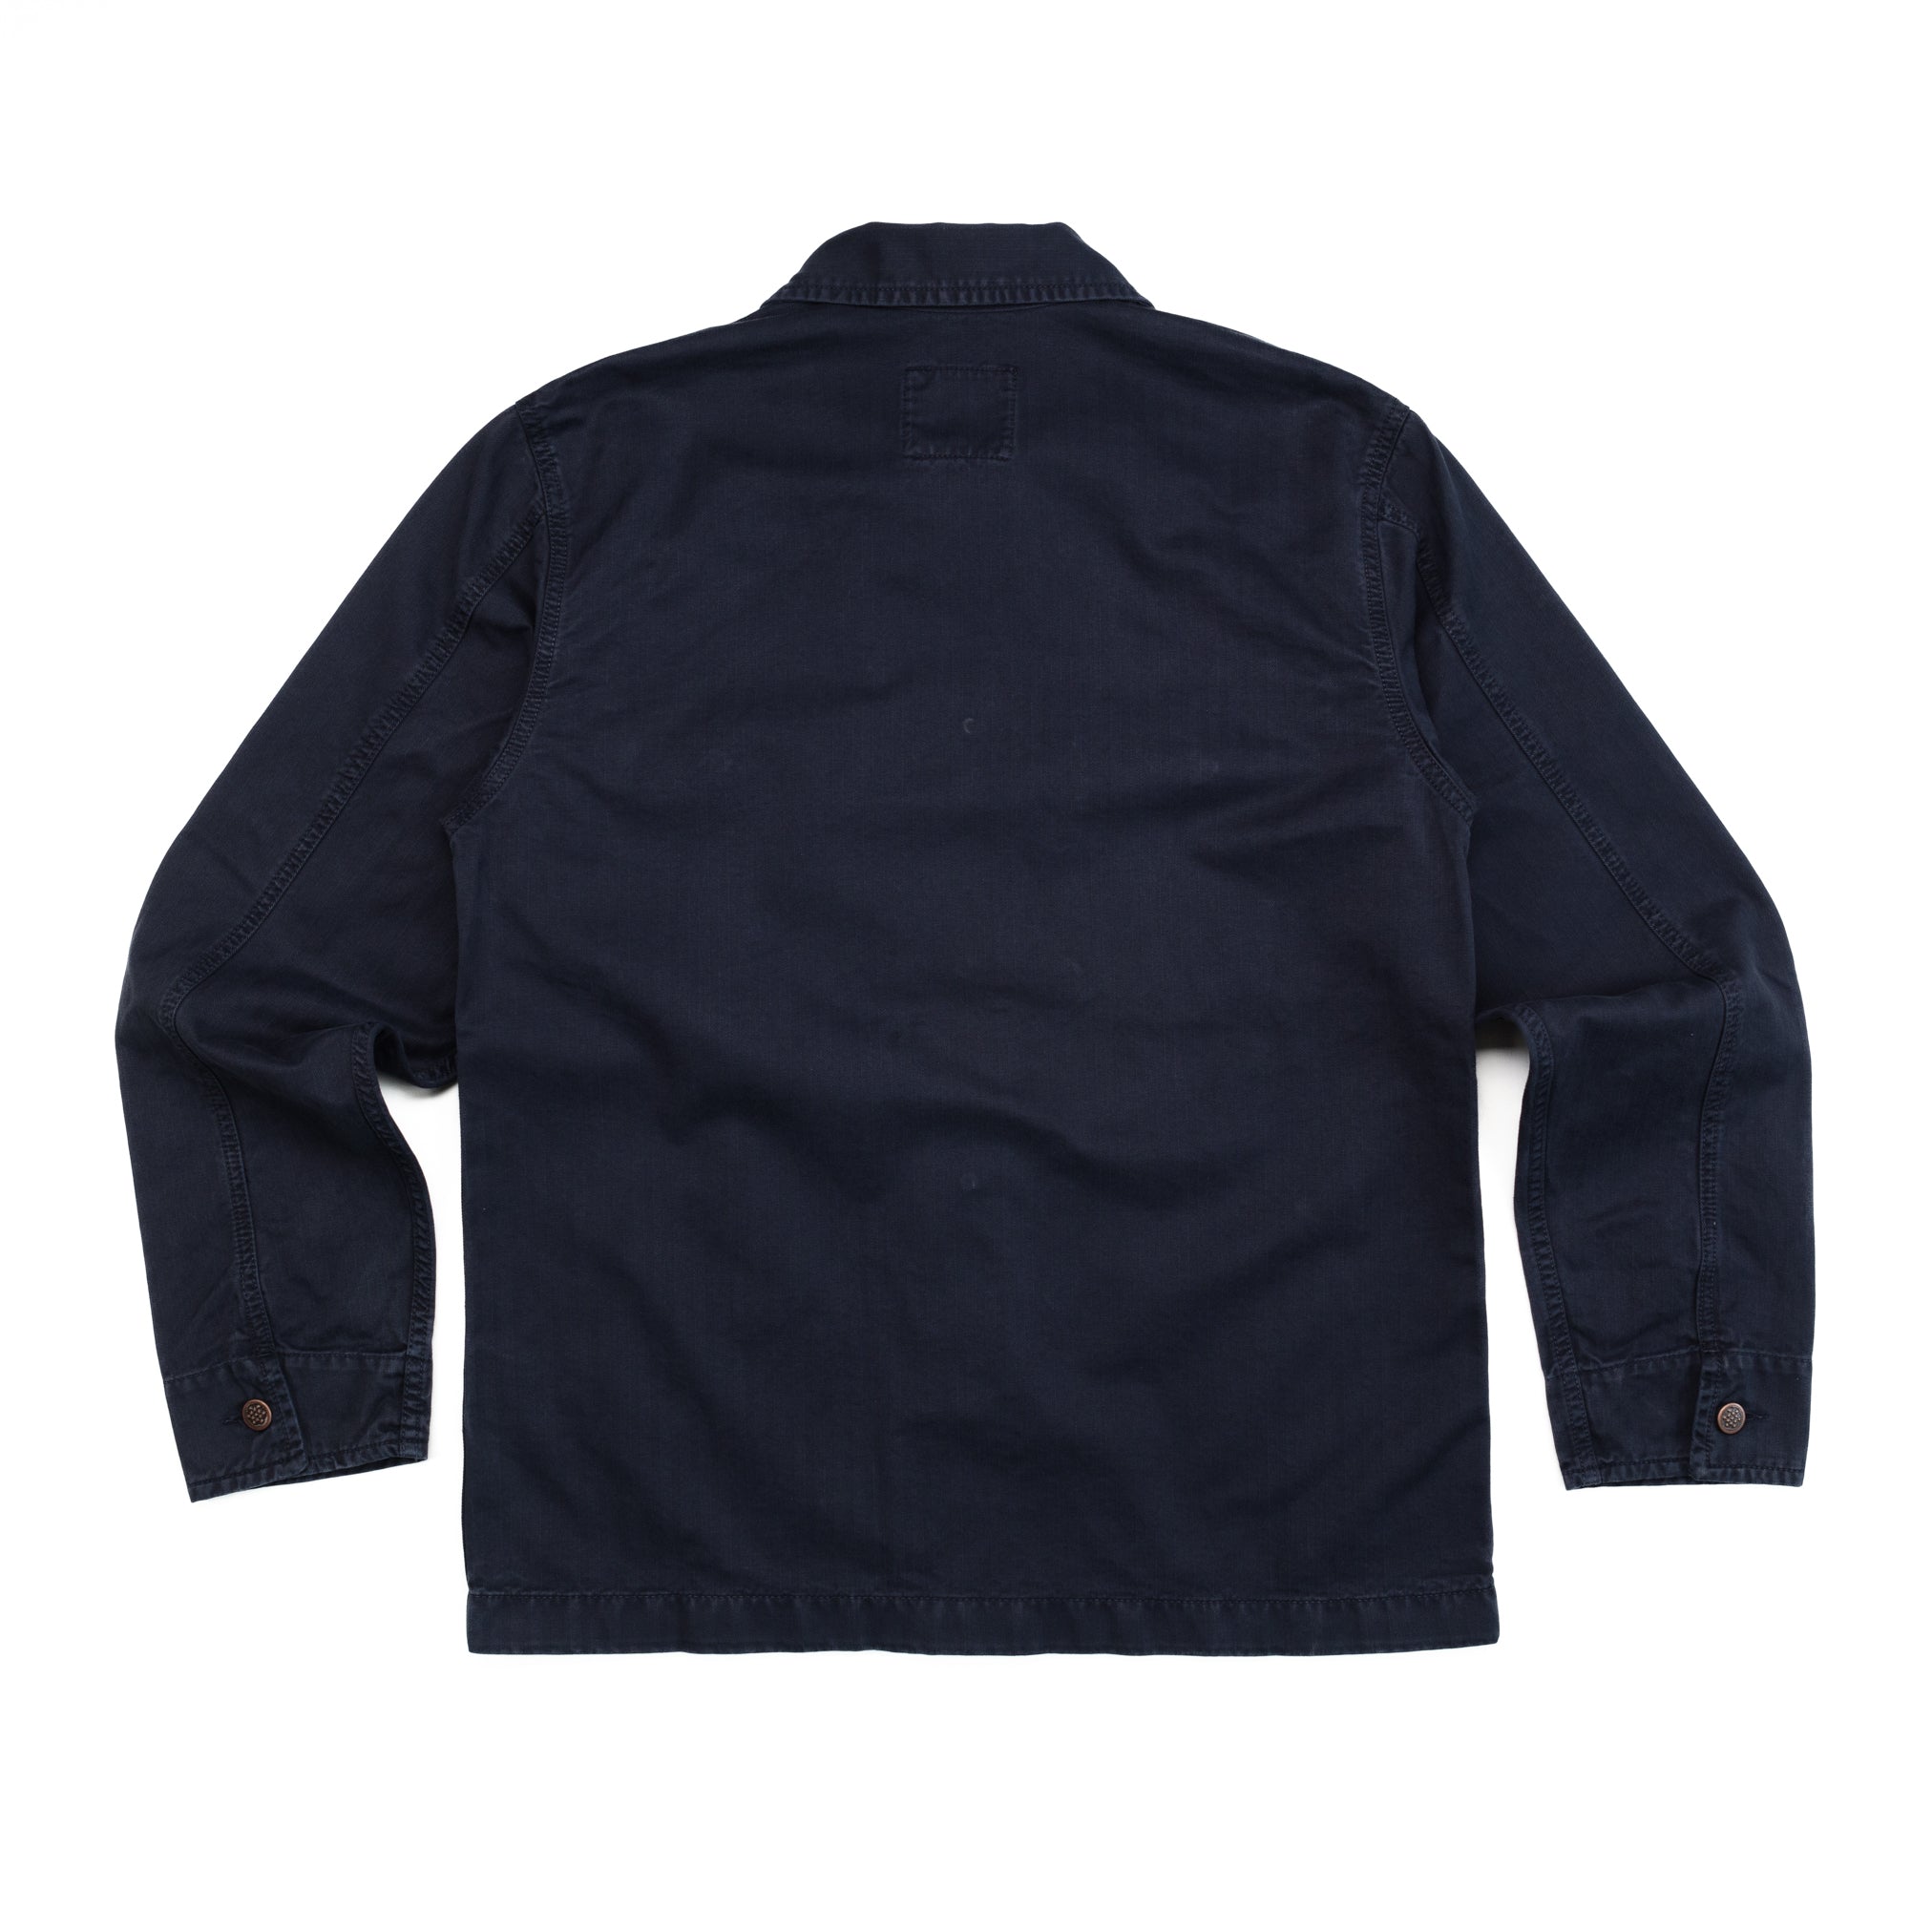 Willy's Field Shirt in Navy HBT